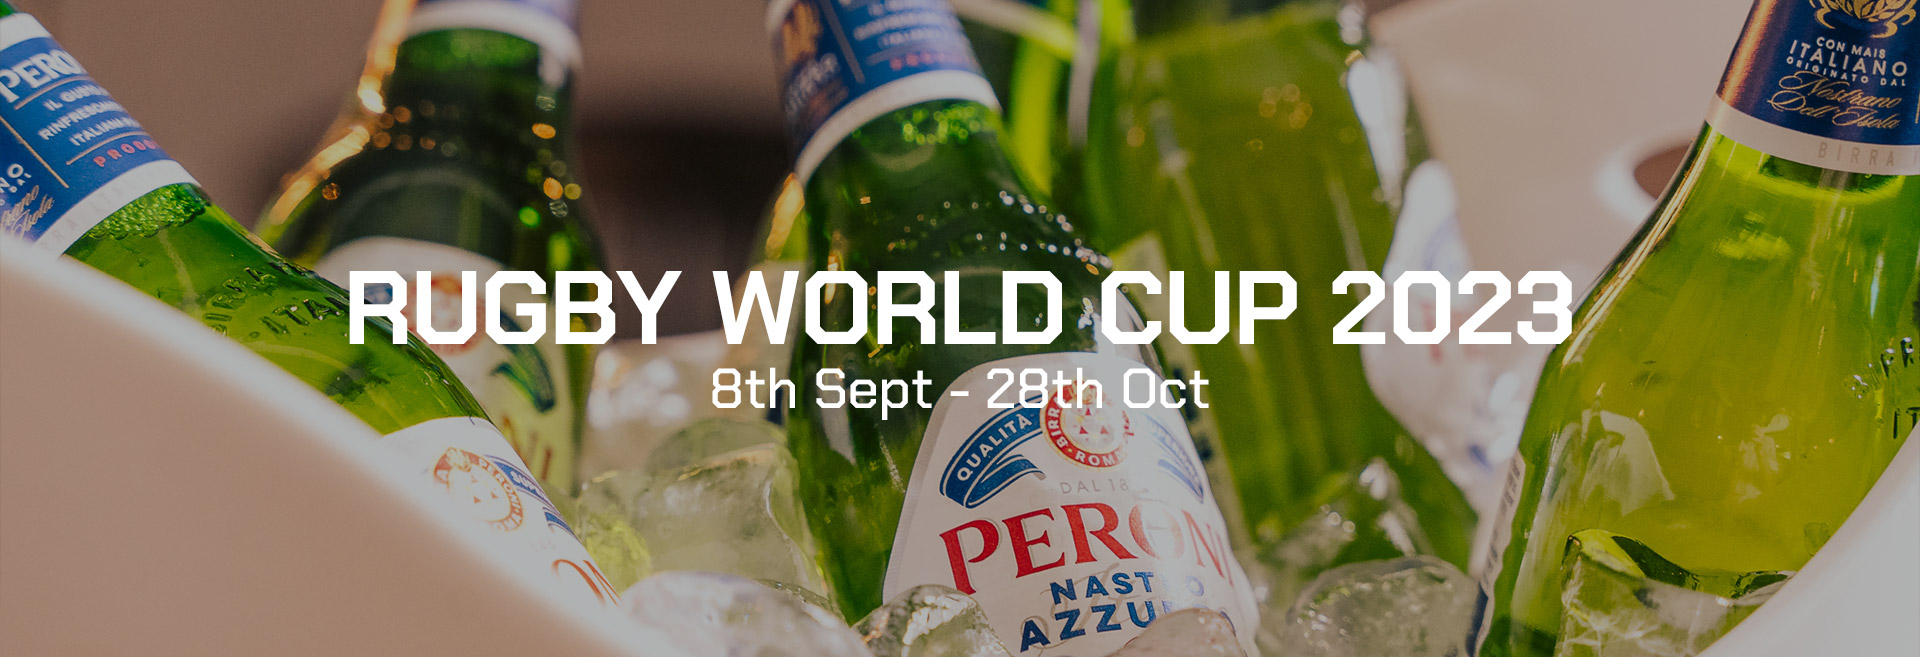 Watch the Rugby World Cup at The Royal George